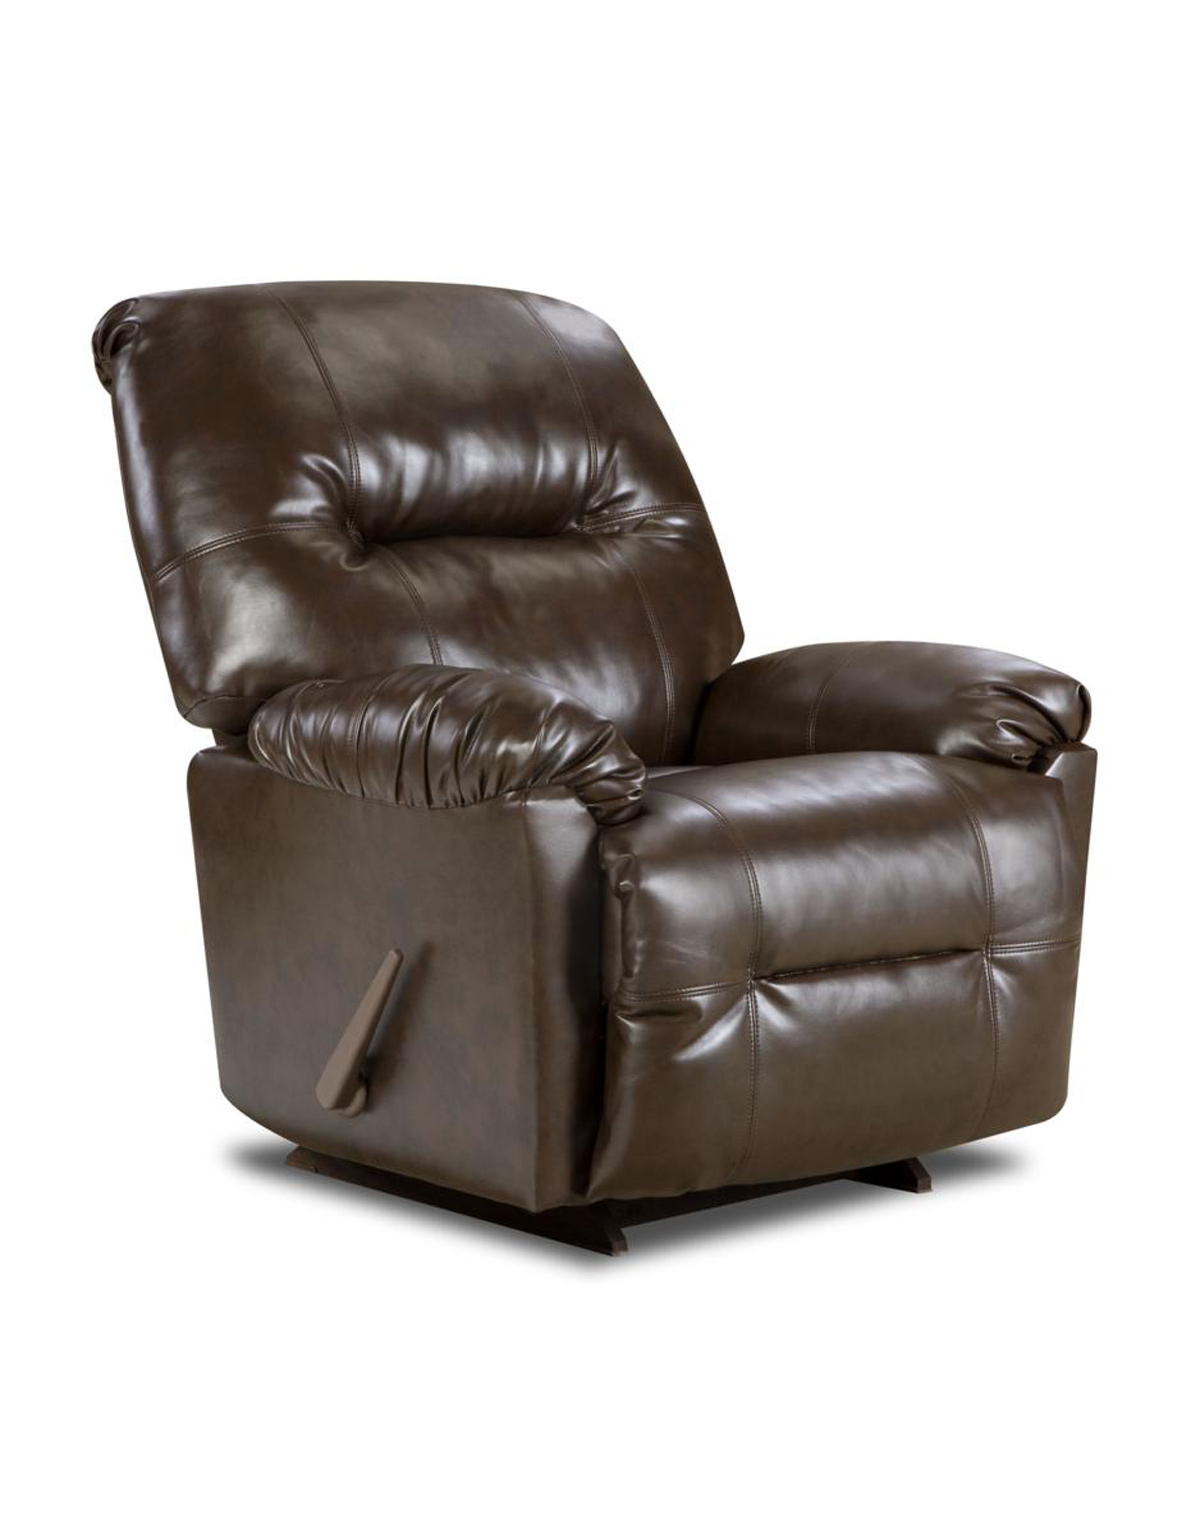 Chelsea Home Gennessee Power Recliner - Bently Brown